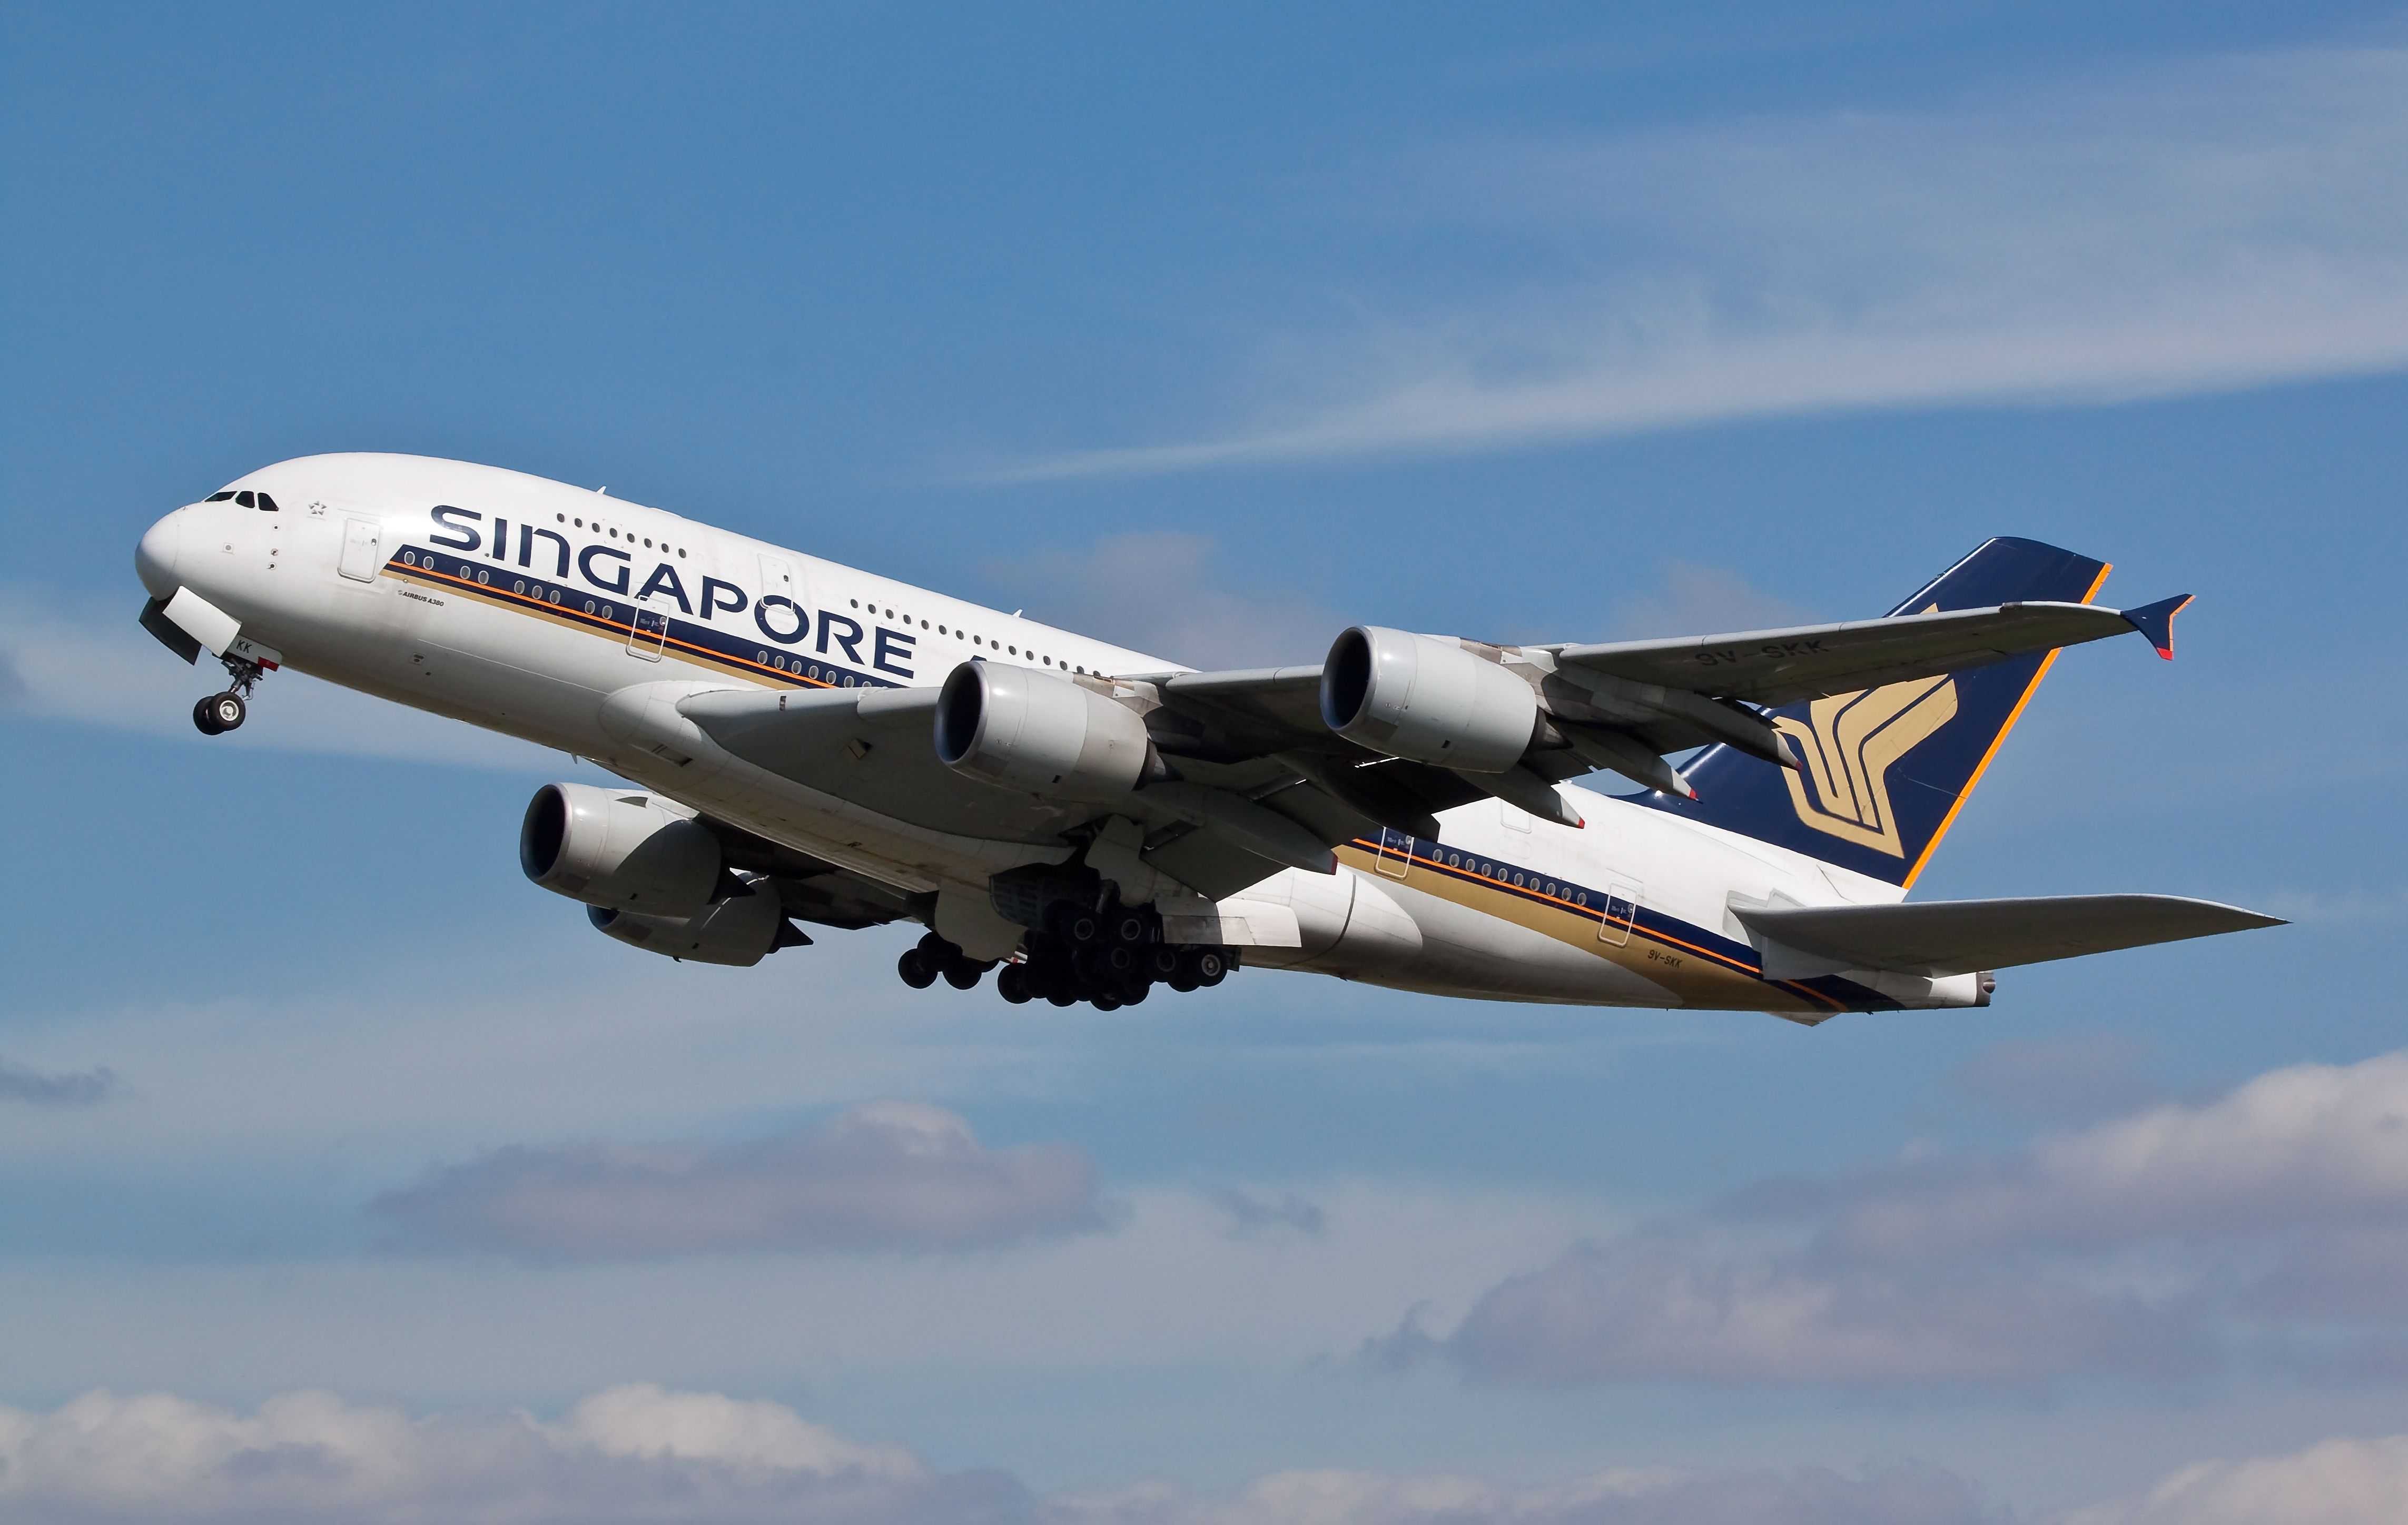 A Singapore Airlines Airbus A380 taking off from London Heathrow Airport.